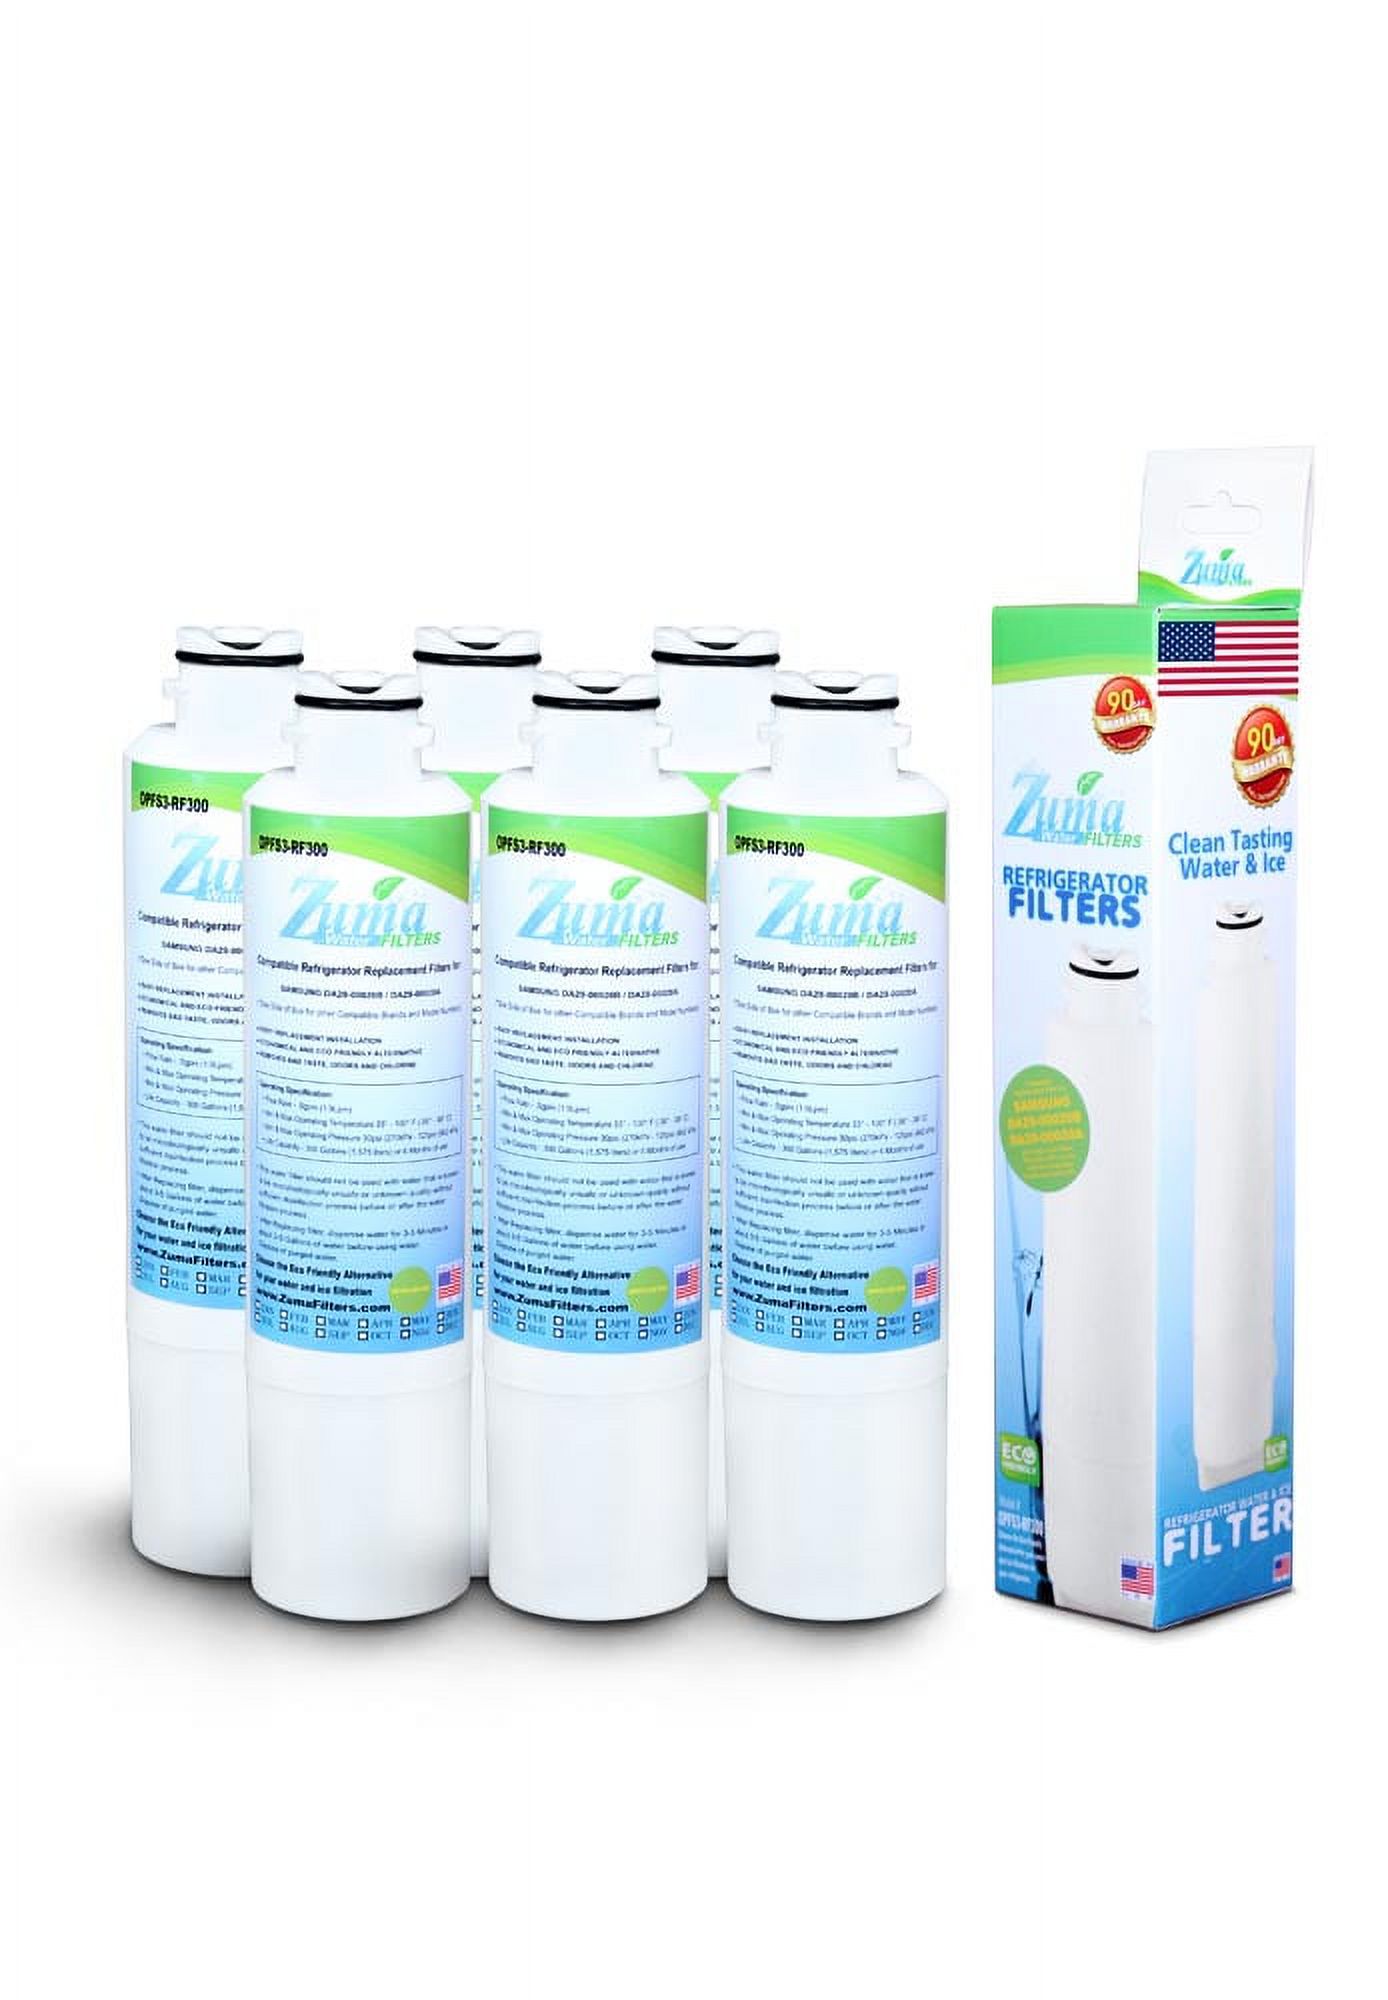 ZUMA Brand , Water and Ice Filter , Model # OPFS3-RF300 , Compatible with Samsung® DA97-08006A-B - 6 Pack - Made in U.S.A. - image 2 of 4